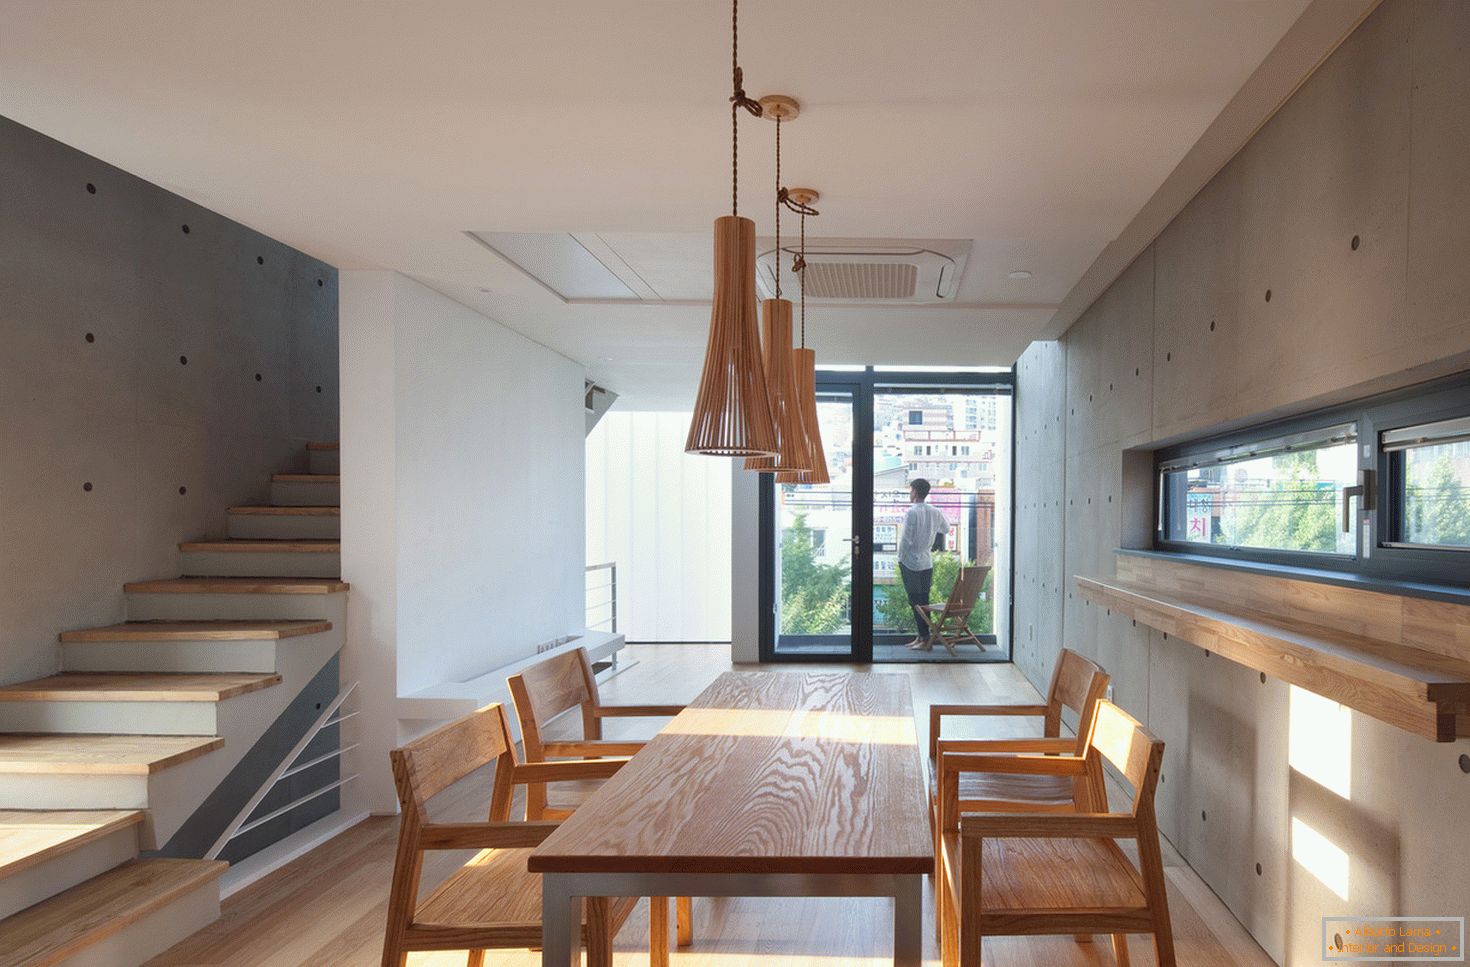 Architecture in a small square: the interior of the dining room